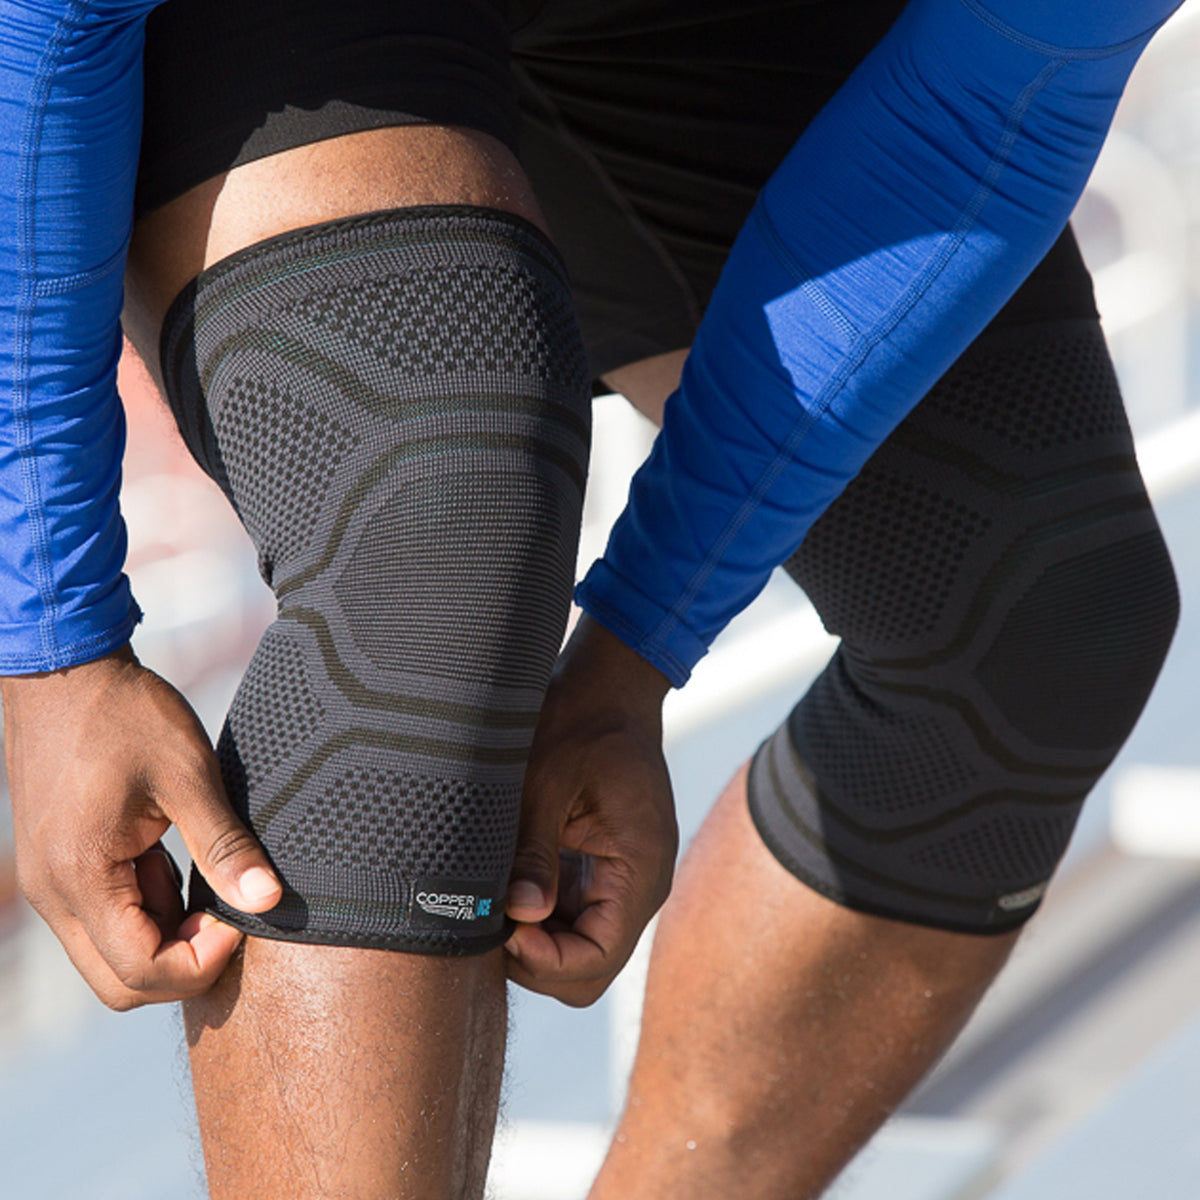 Copper Fit ICE Knee Sleeve Infused with Cooling Action & Menthol - Miazone